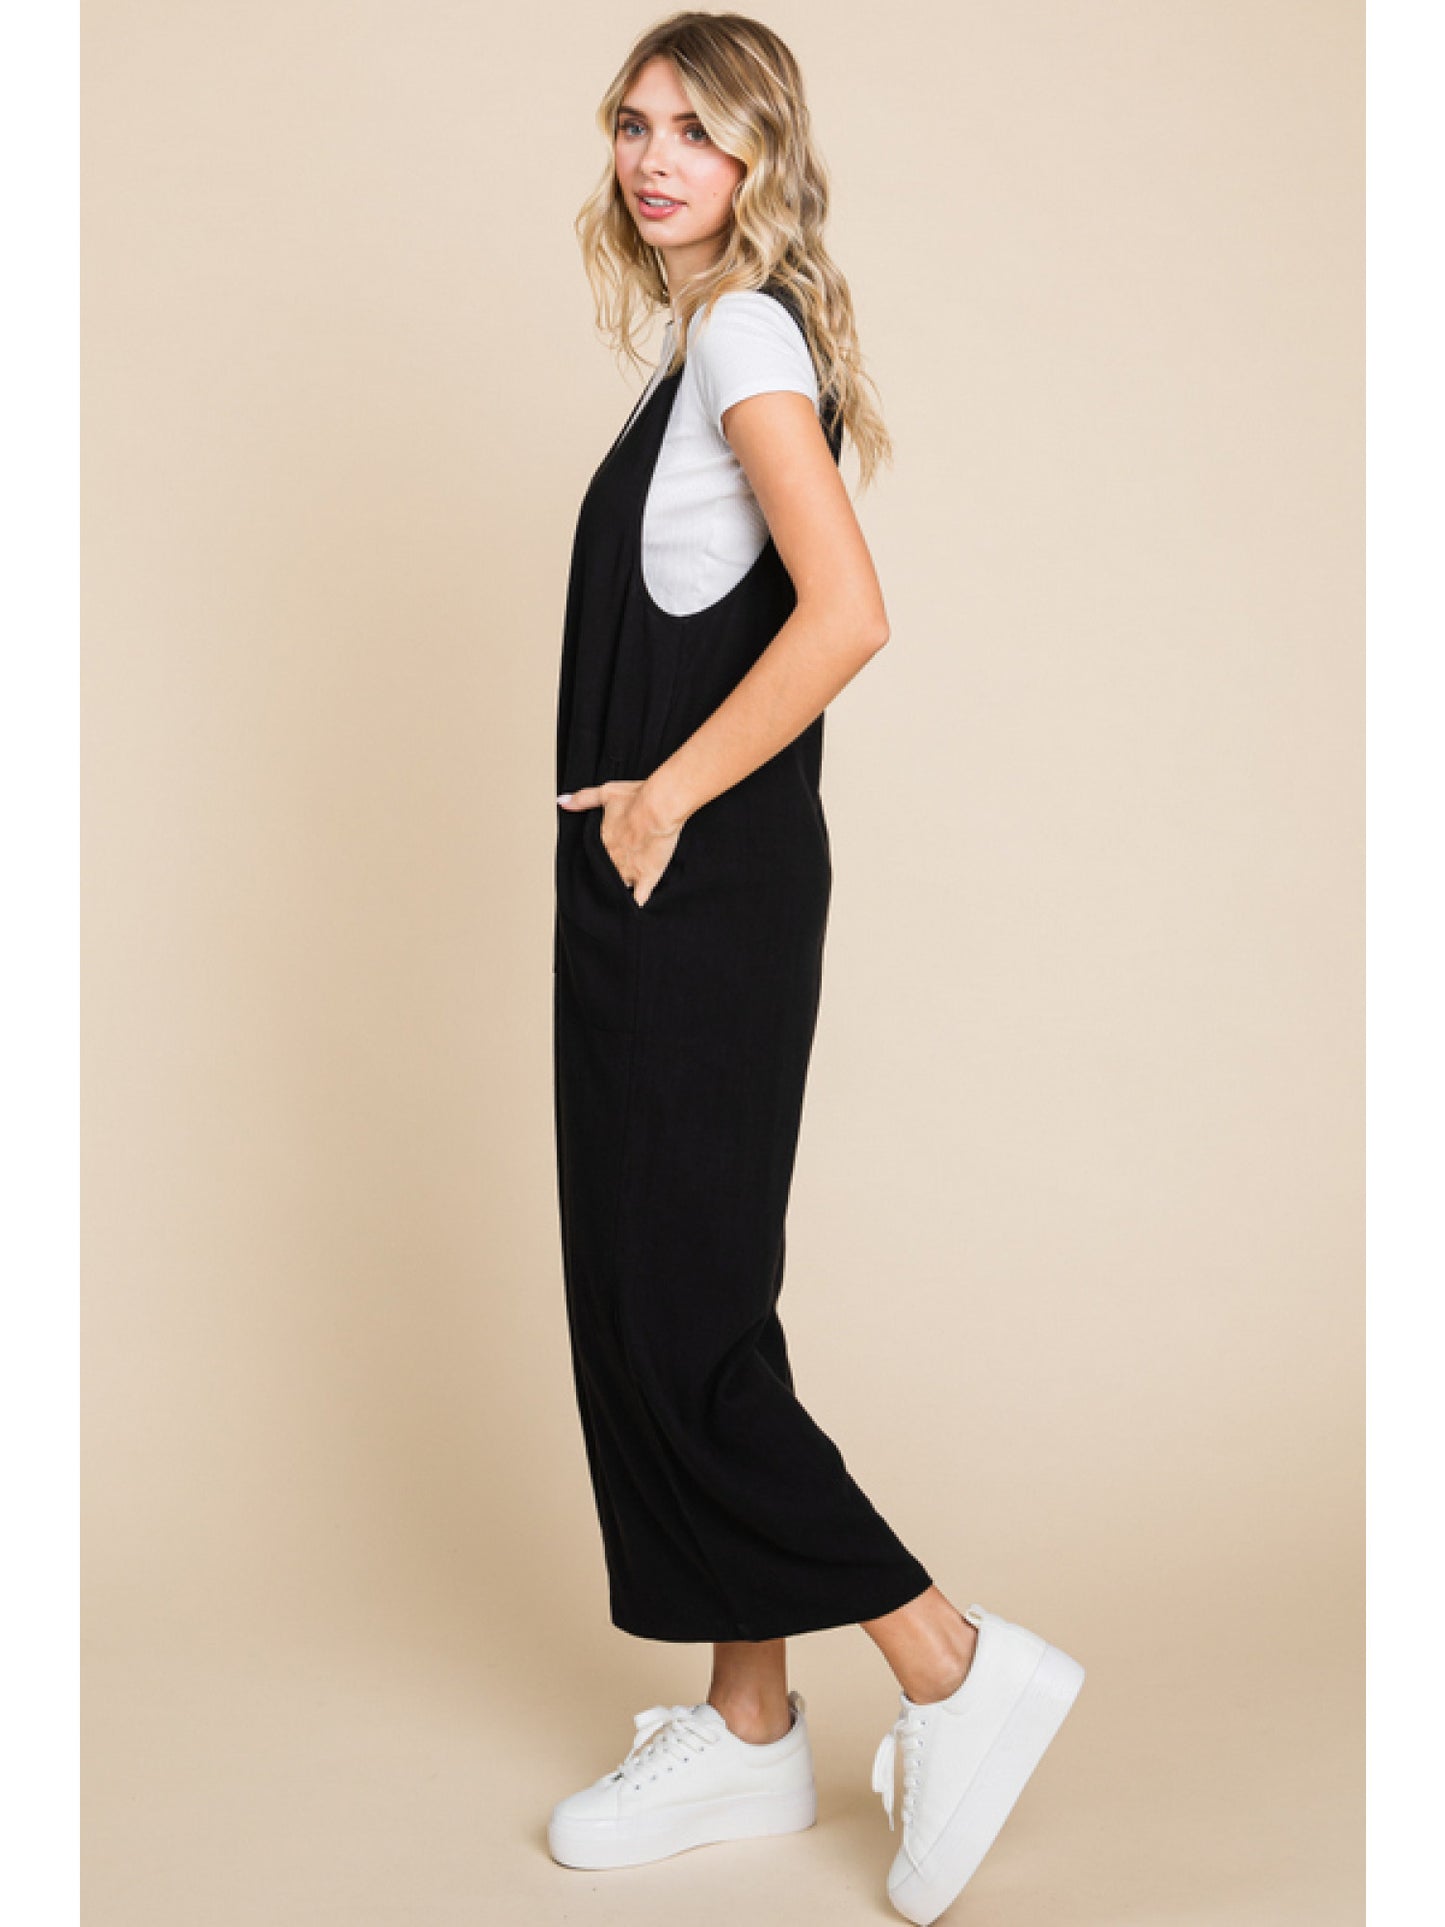 Solid linen sleeveless jumpsuit, side pockets, and wide crop legs